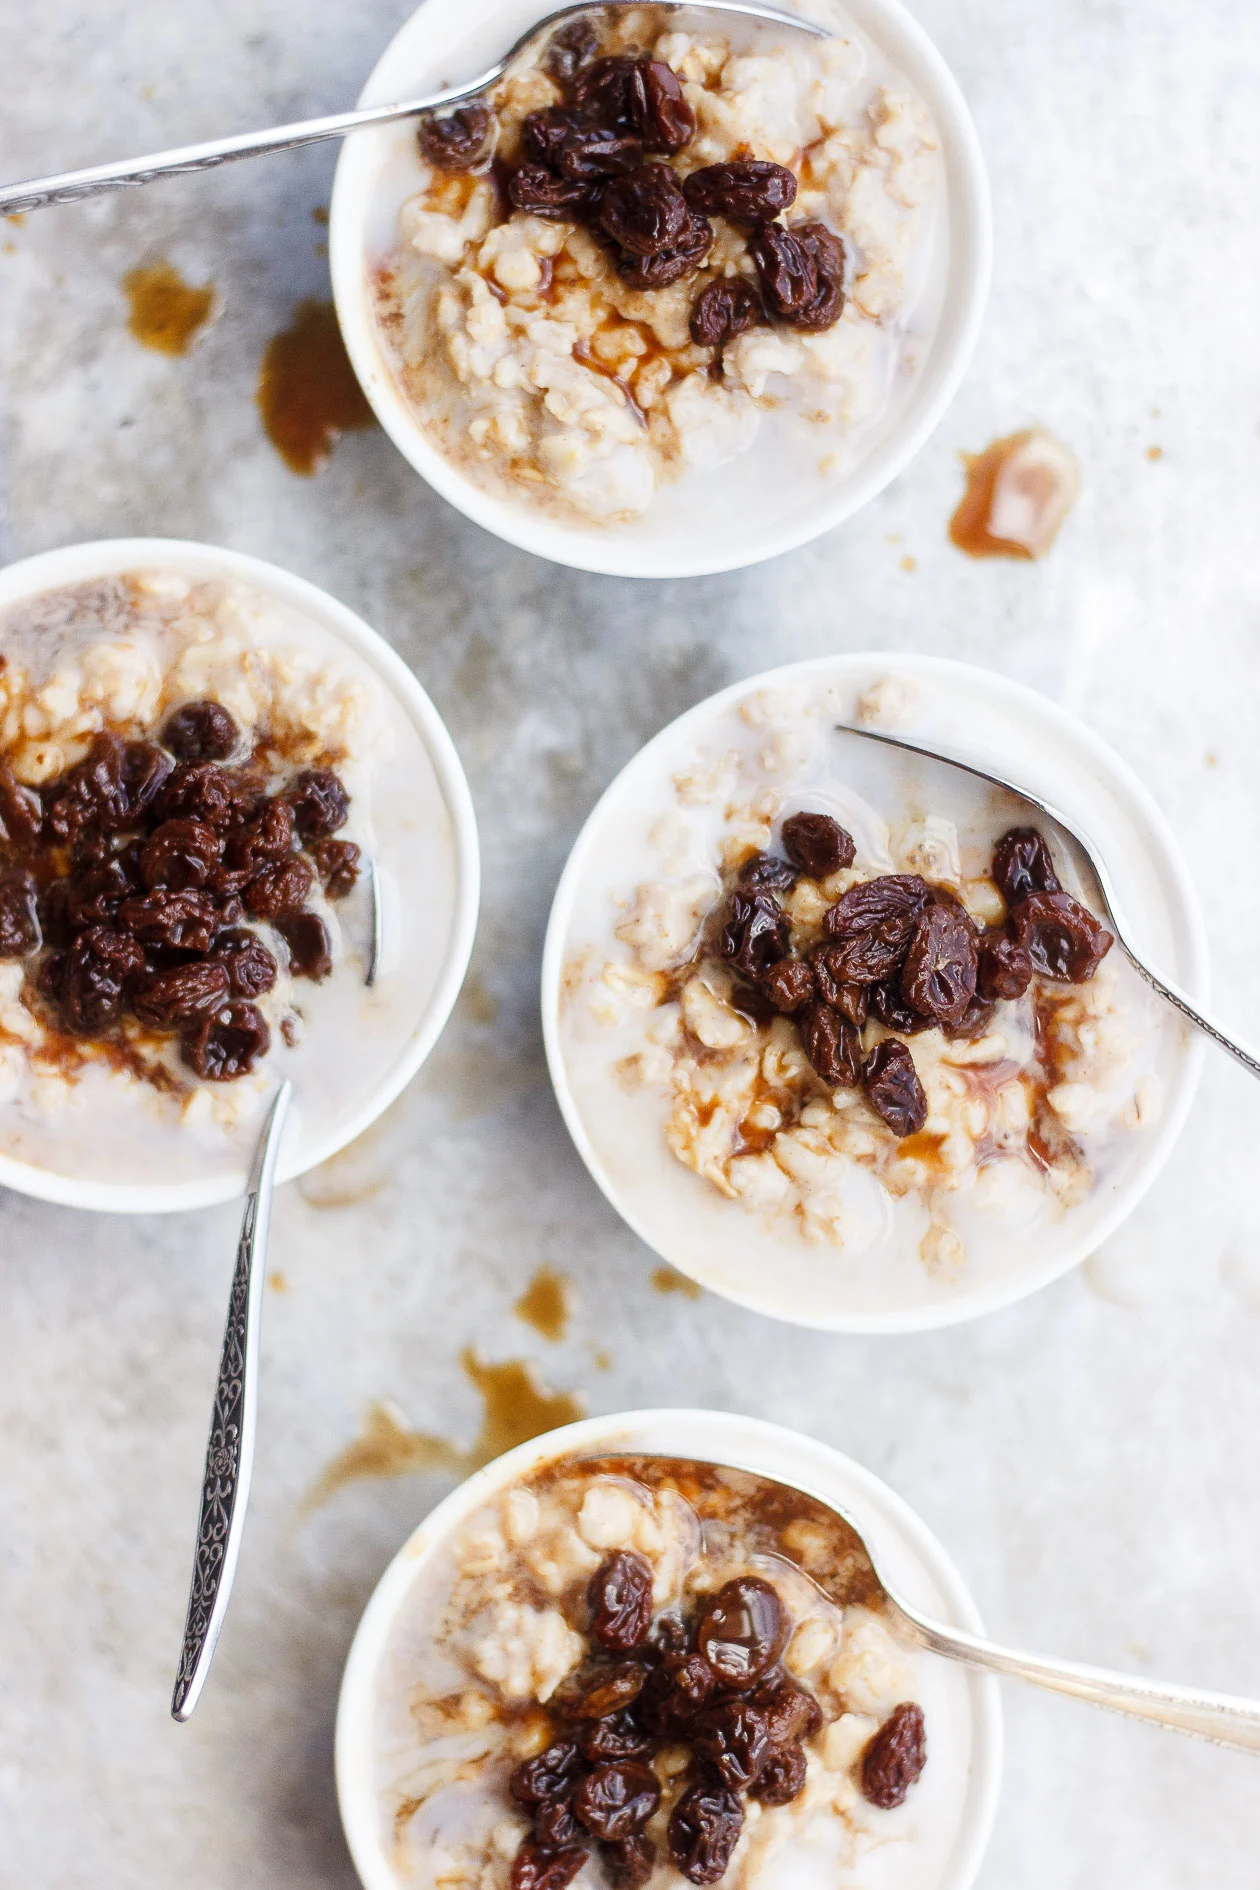 Basic Overnight Oats with Black Tea Soaked Raisins | A simple and classic basic overnight oats recipe with a flavor-packed topping of black tea soaked raisins. Naturally vegan, gluten and refined-sugar free.